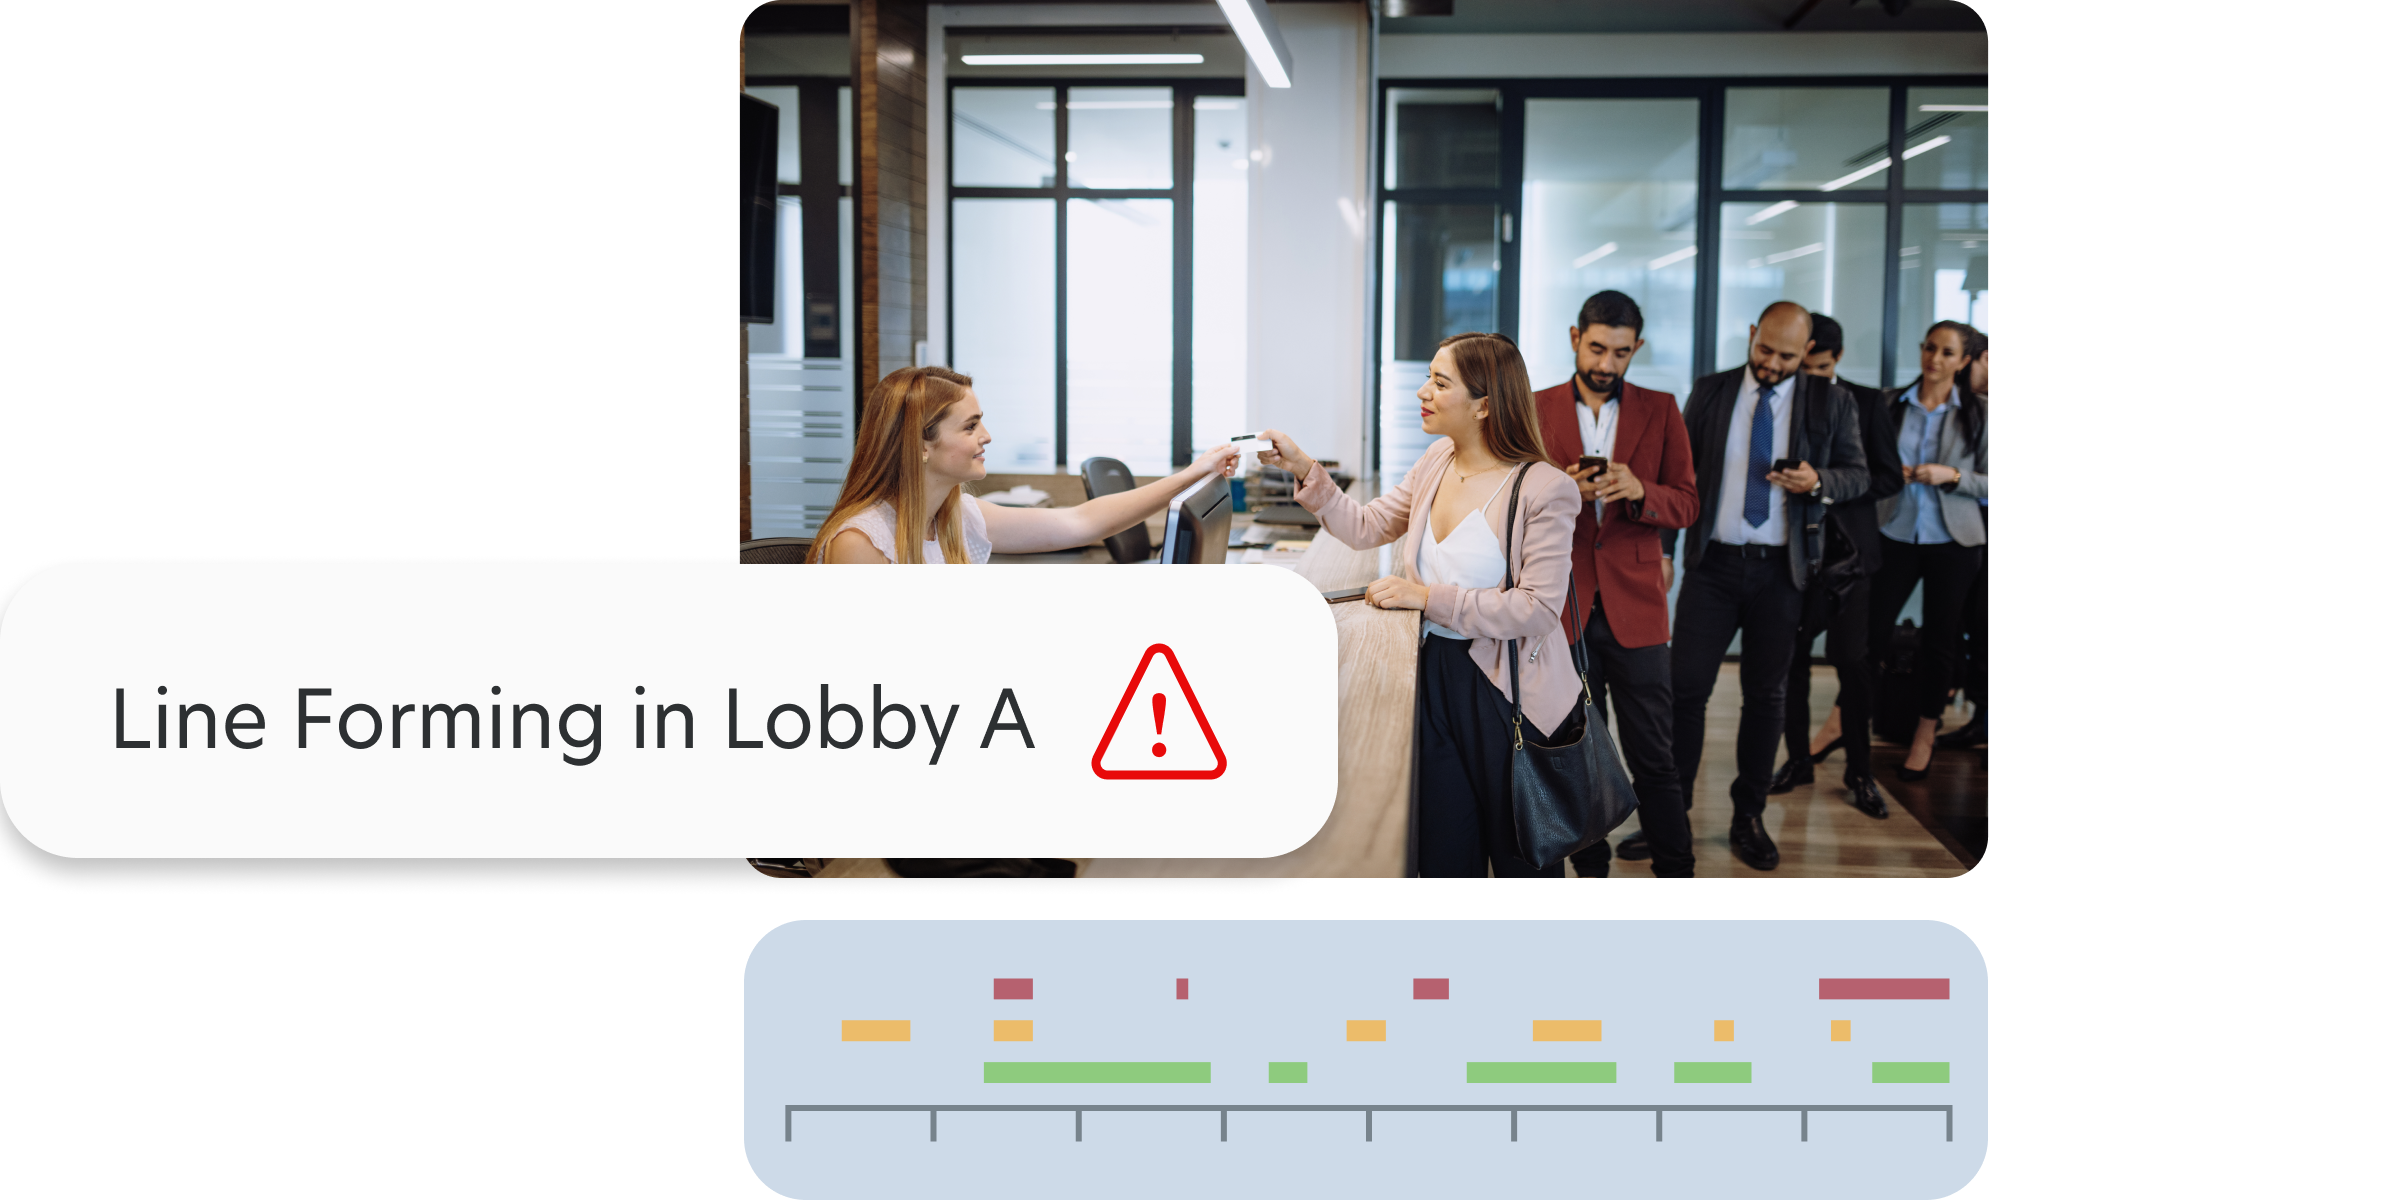 "Line Forming" Alert from an office lobby filled with business people popping up in the Rhombus Console 